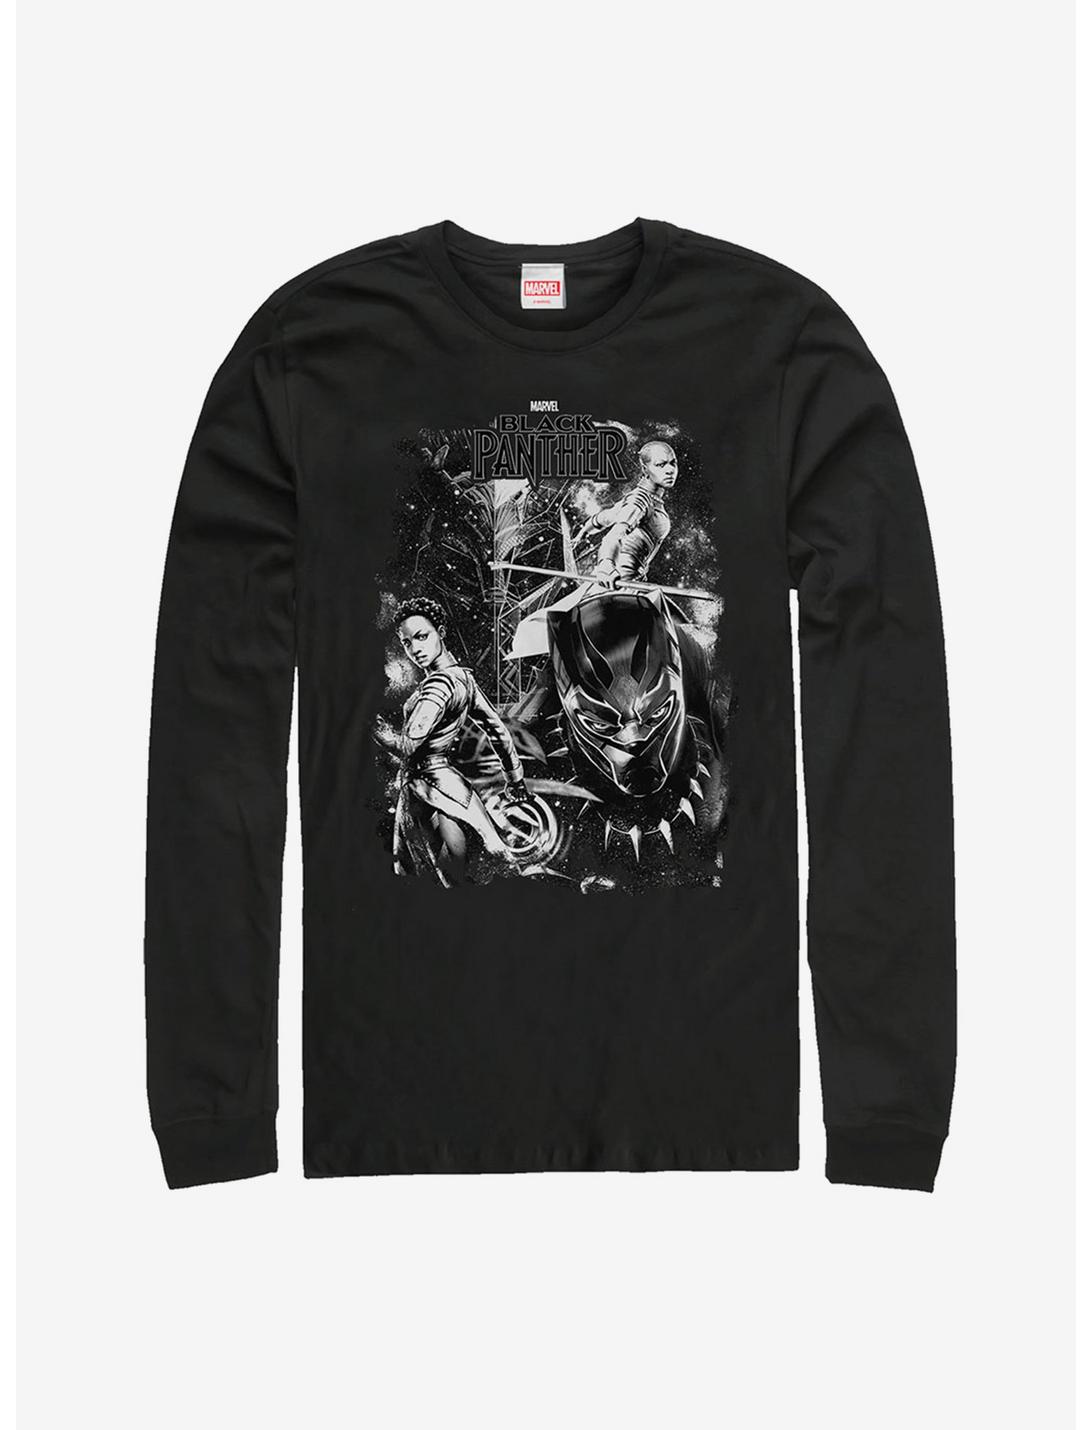 Marvel Black Panther Starry Characters Long Sleeve T-Shirt, BLACK, hi-res